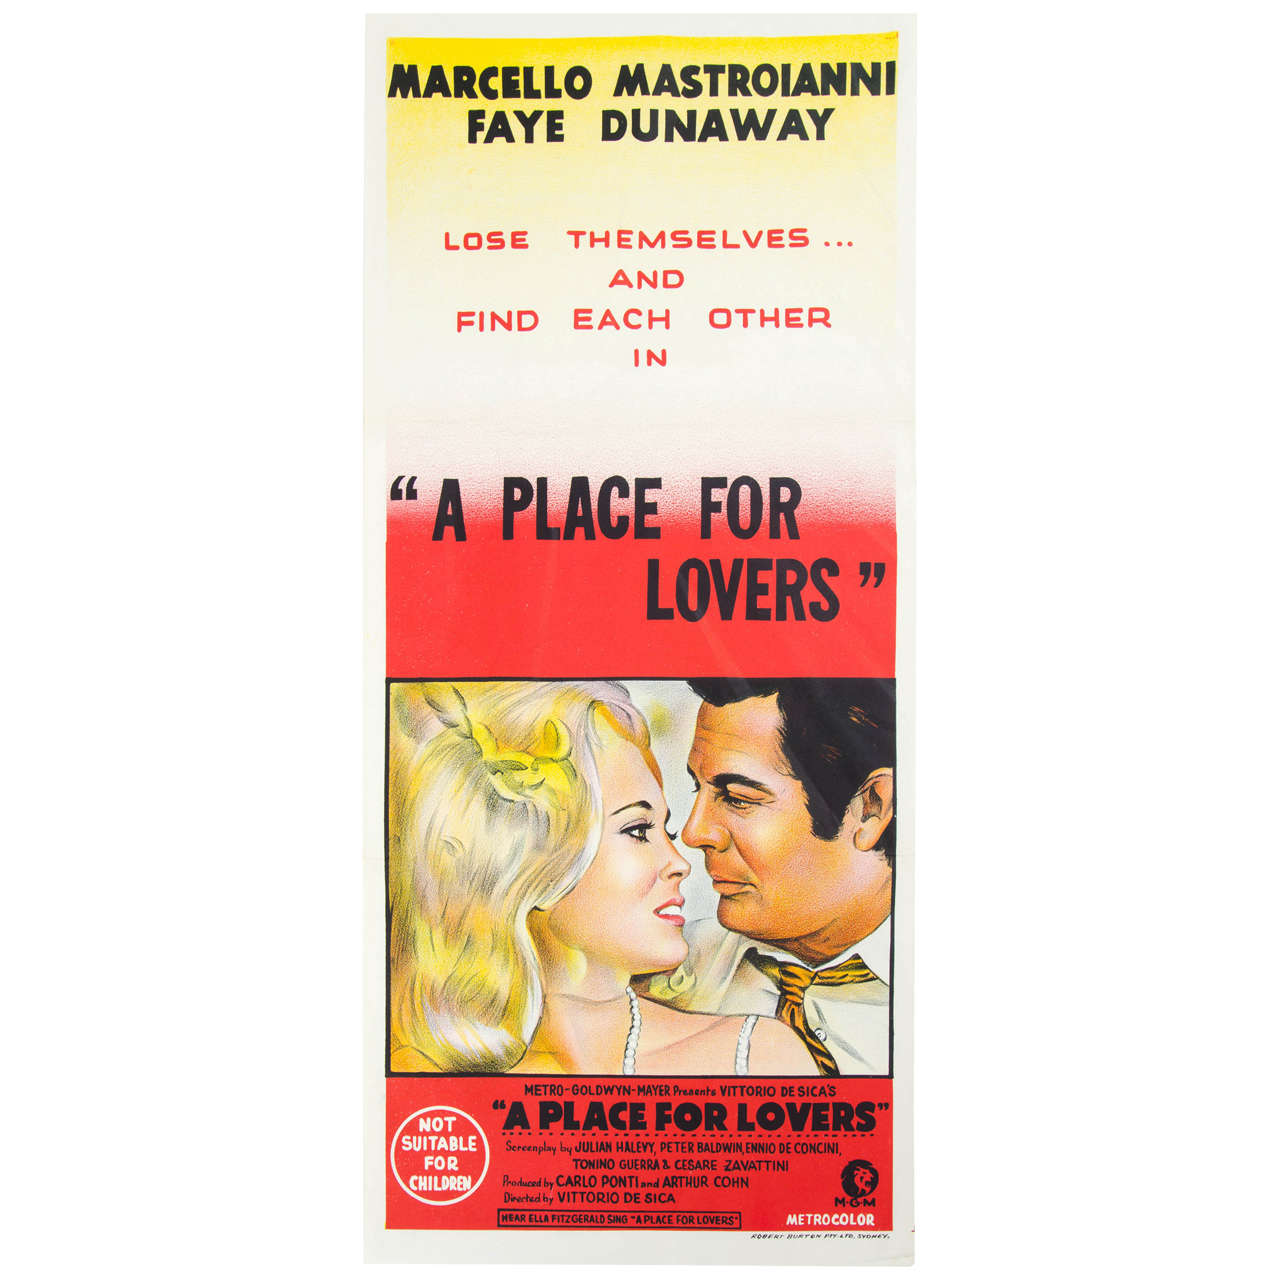 1968 Film Poster "A Place for Lovers" Faye Dunaway Australian Market